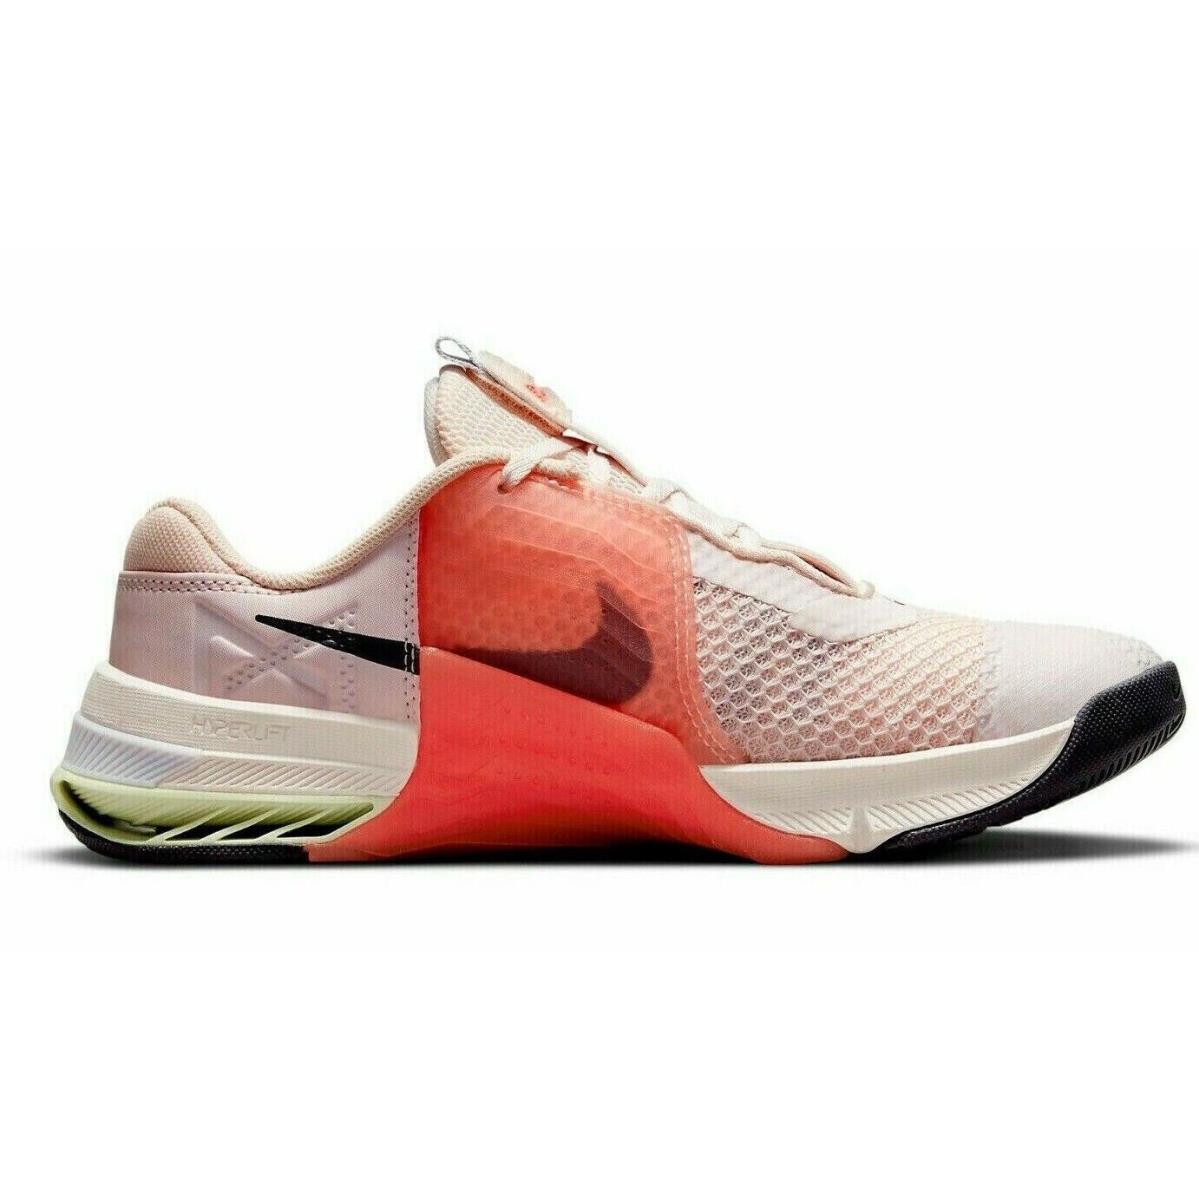 Nike shoes Metcon - Pink 1